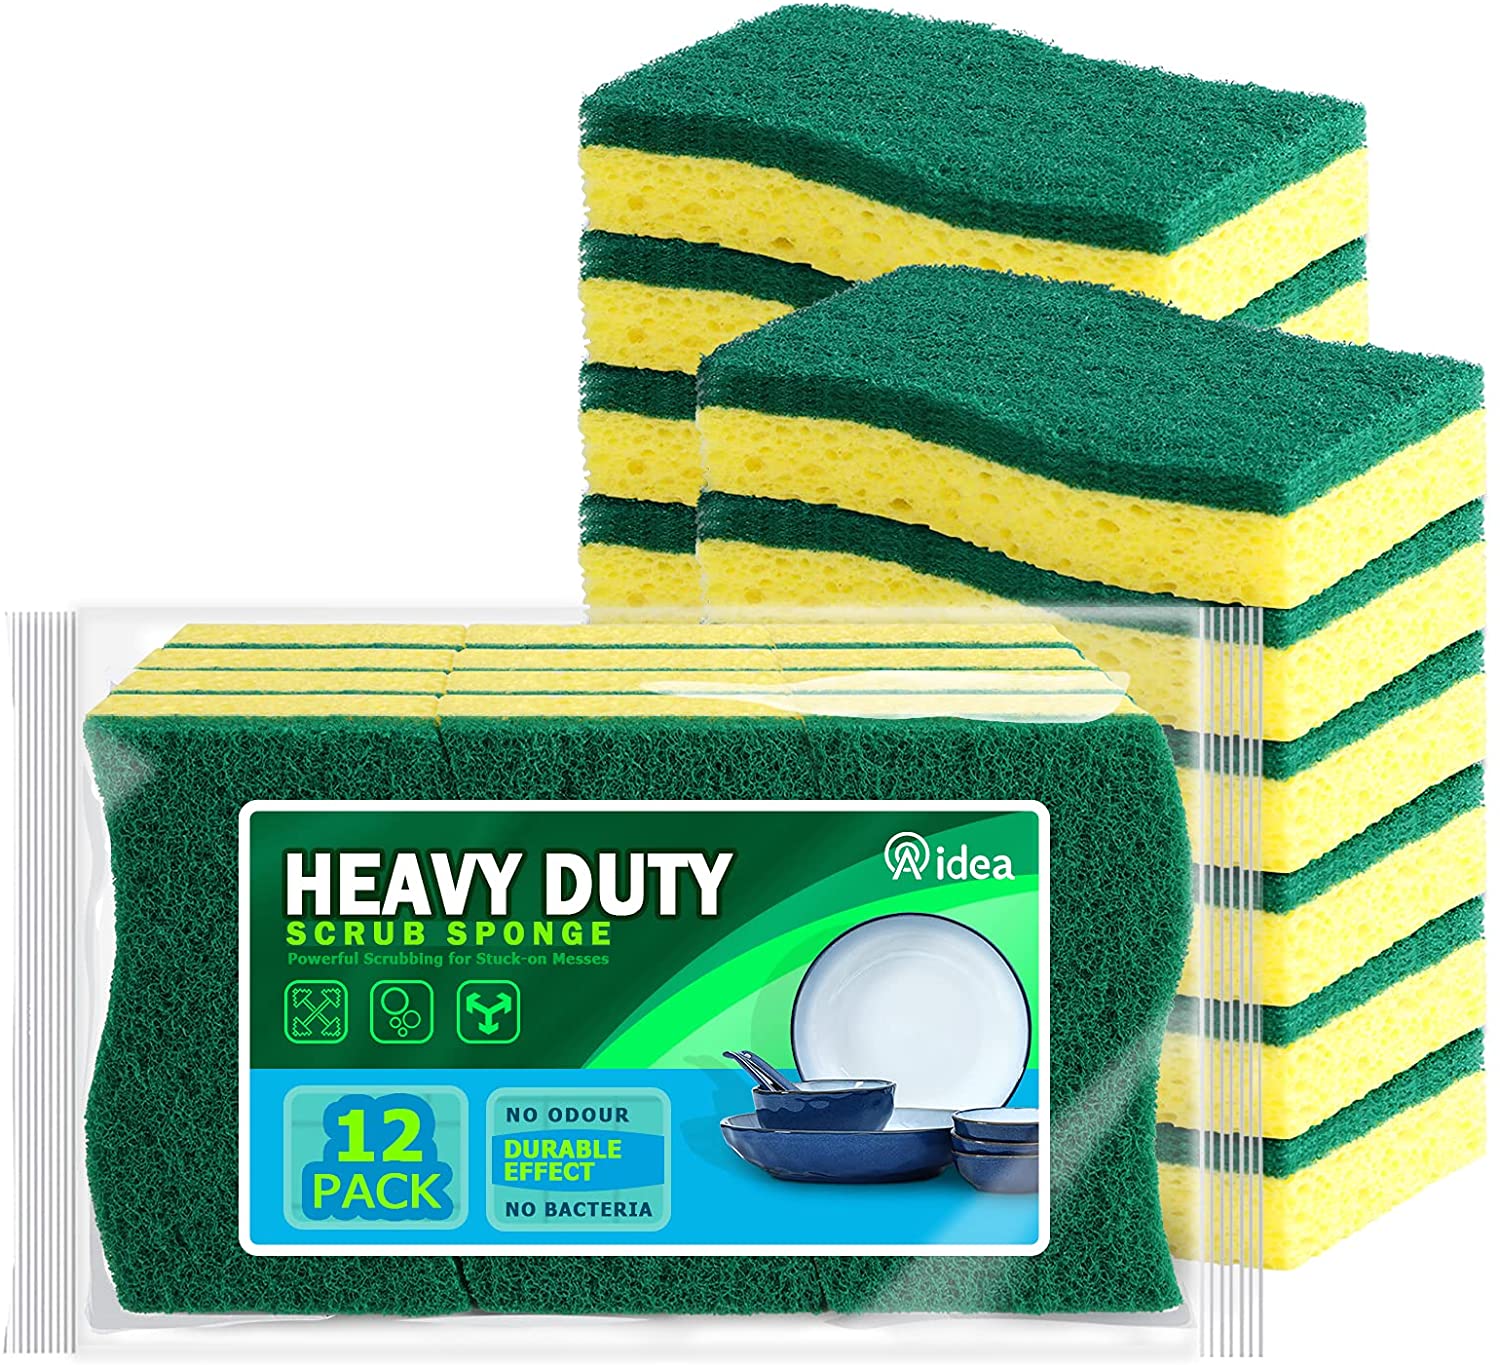 Heavy Duty Multi Use Cleaning Sponges rub Non-Scratch Sponge Scrubbing Dish  Sponges Use for Kitchens